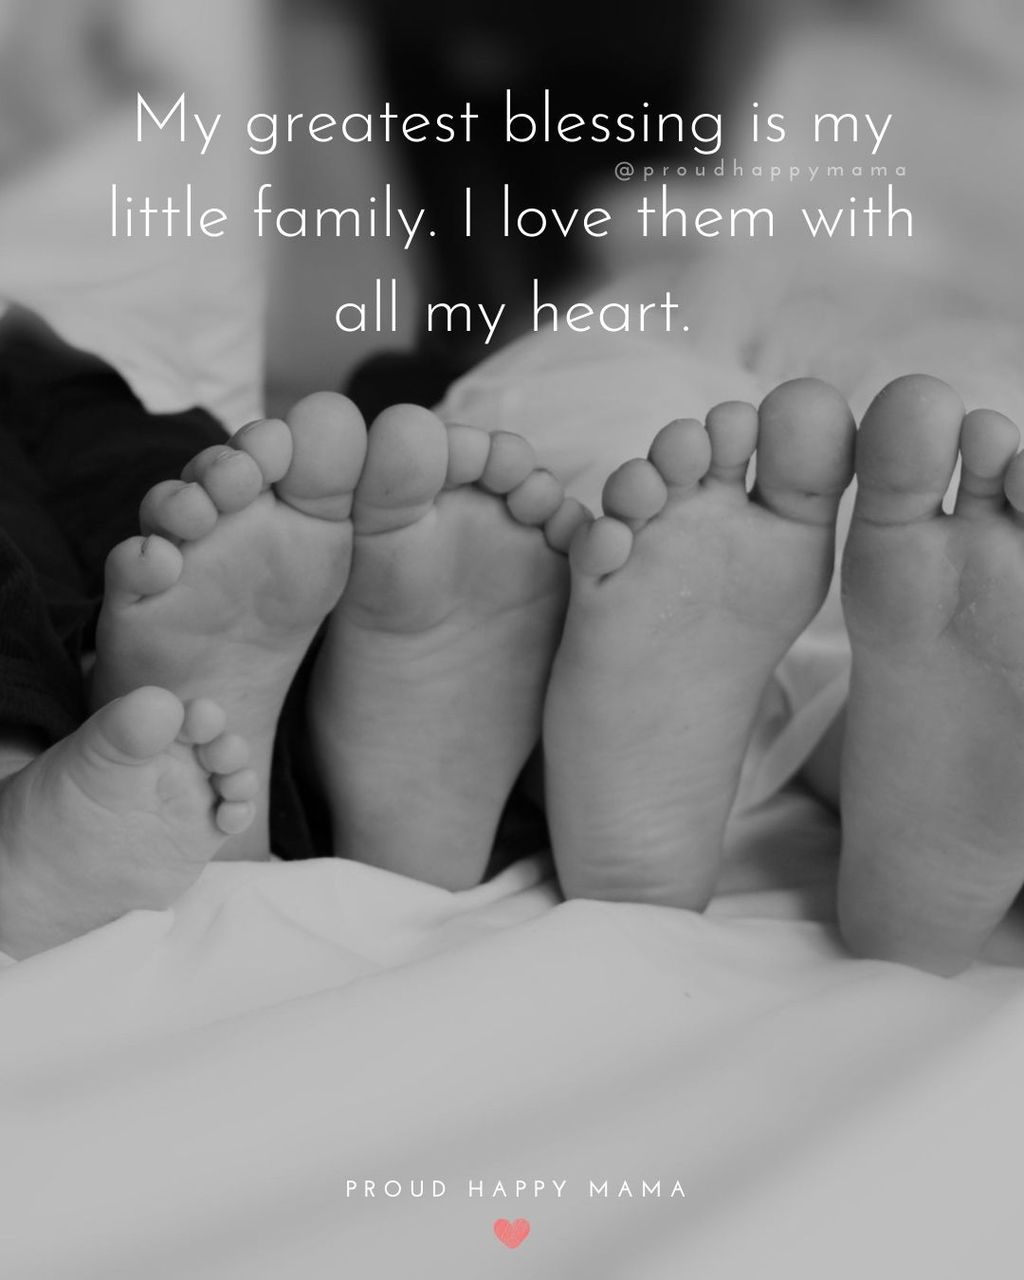 A Family Quotes | My greatest blessing is my little family. I love them with all my heart.